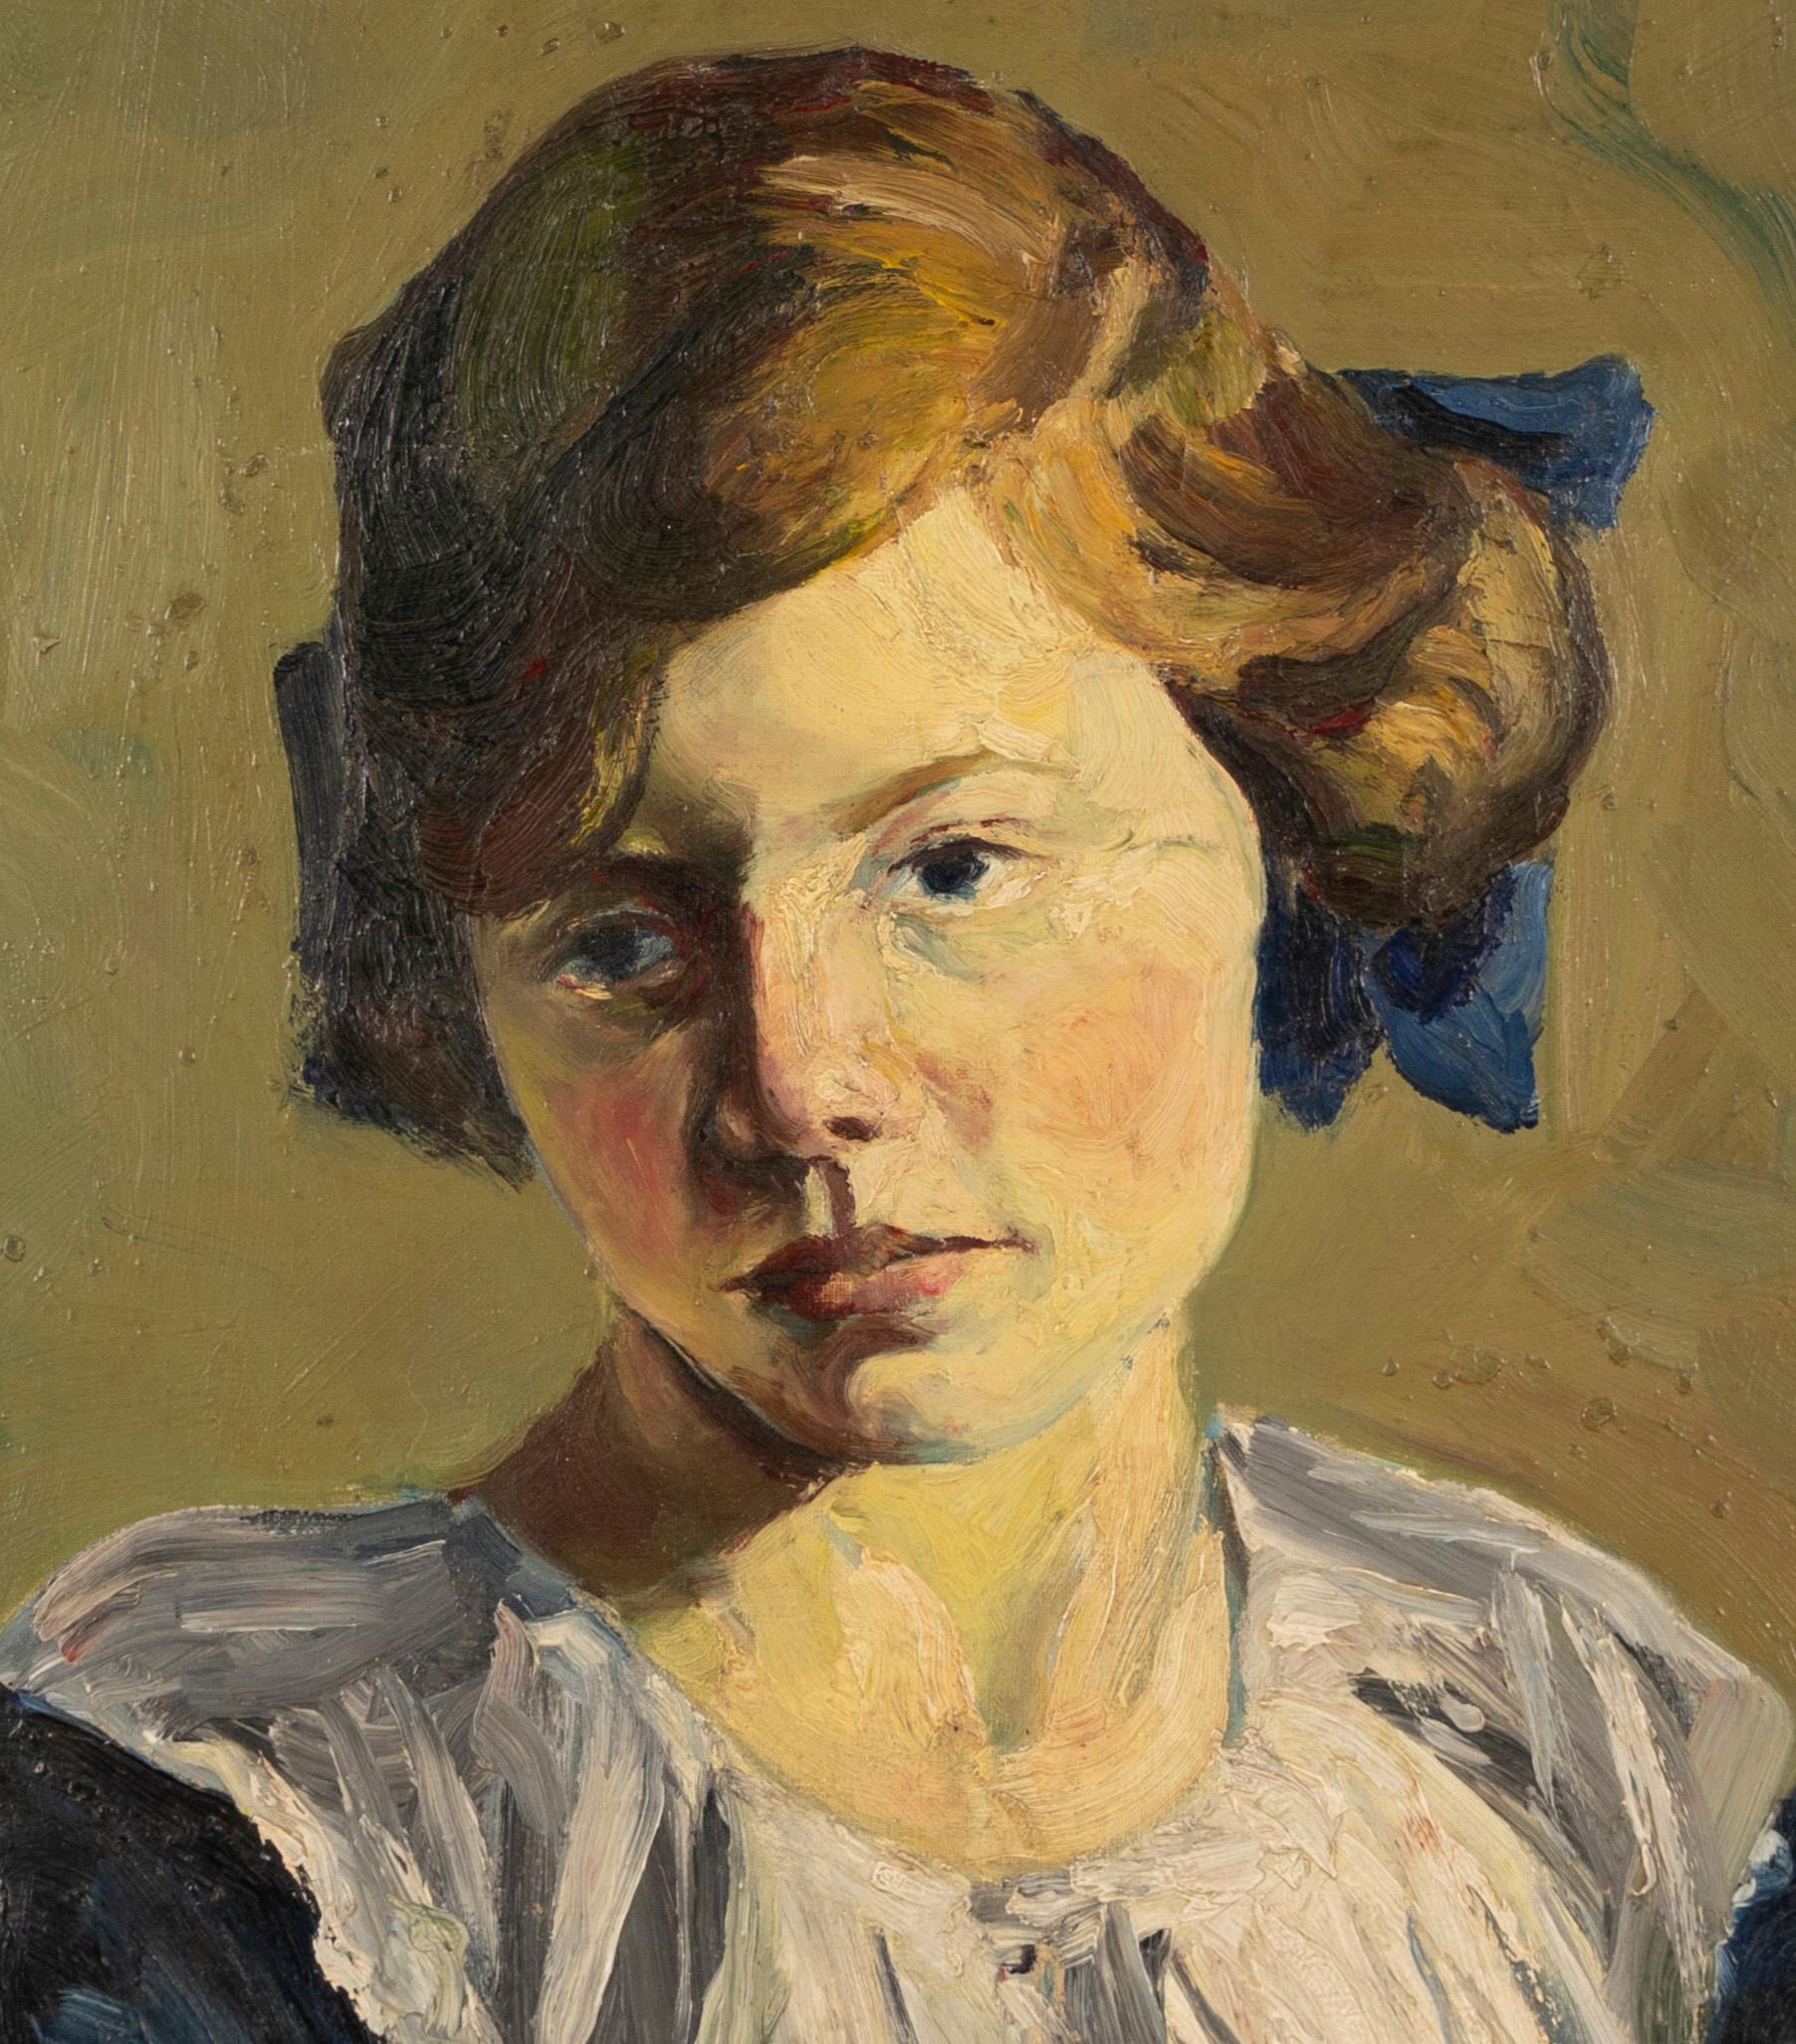 Antique impressionist painting of a young woman by Chee Chin S Cheung Lee (1896 - 1966).  Oil on board, circa 1920.  Signé.  Housed in a giltwood frame.  Image size, 18L x 17H.  